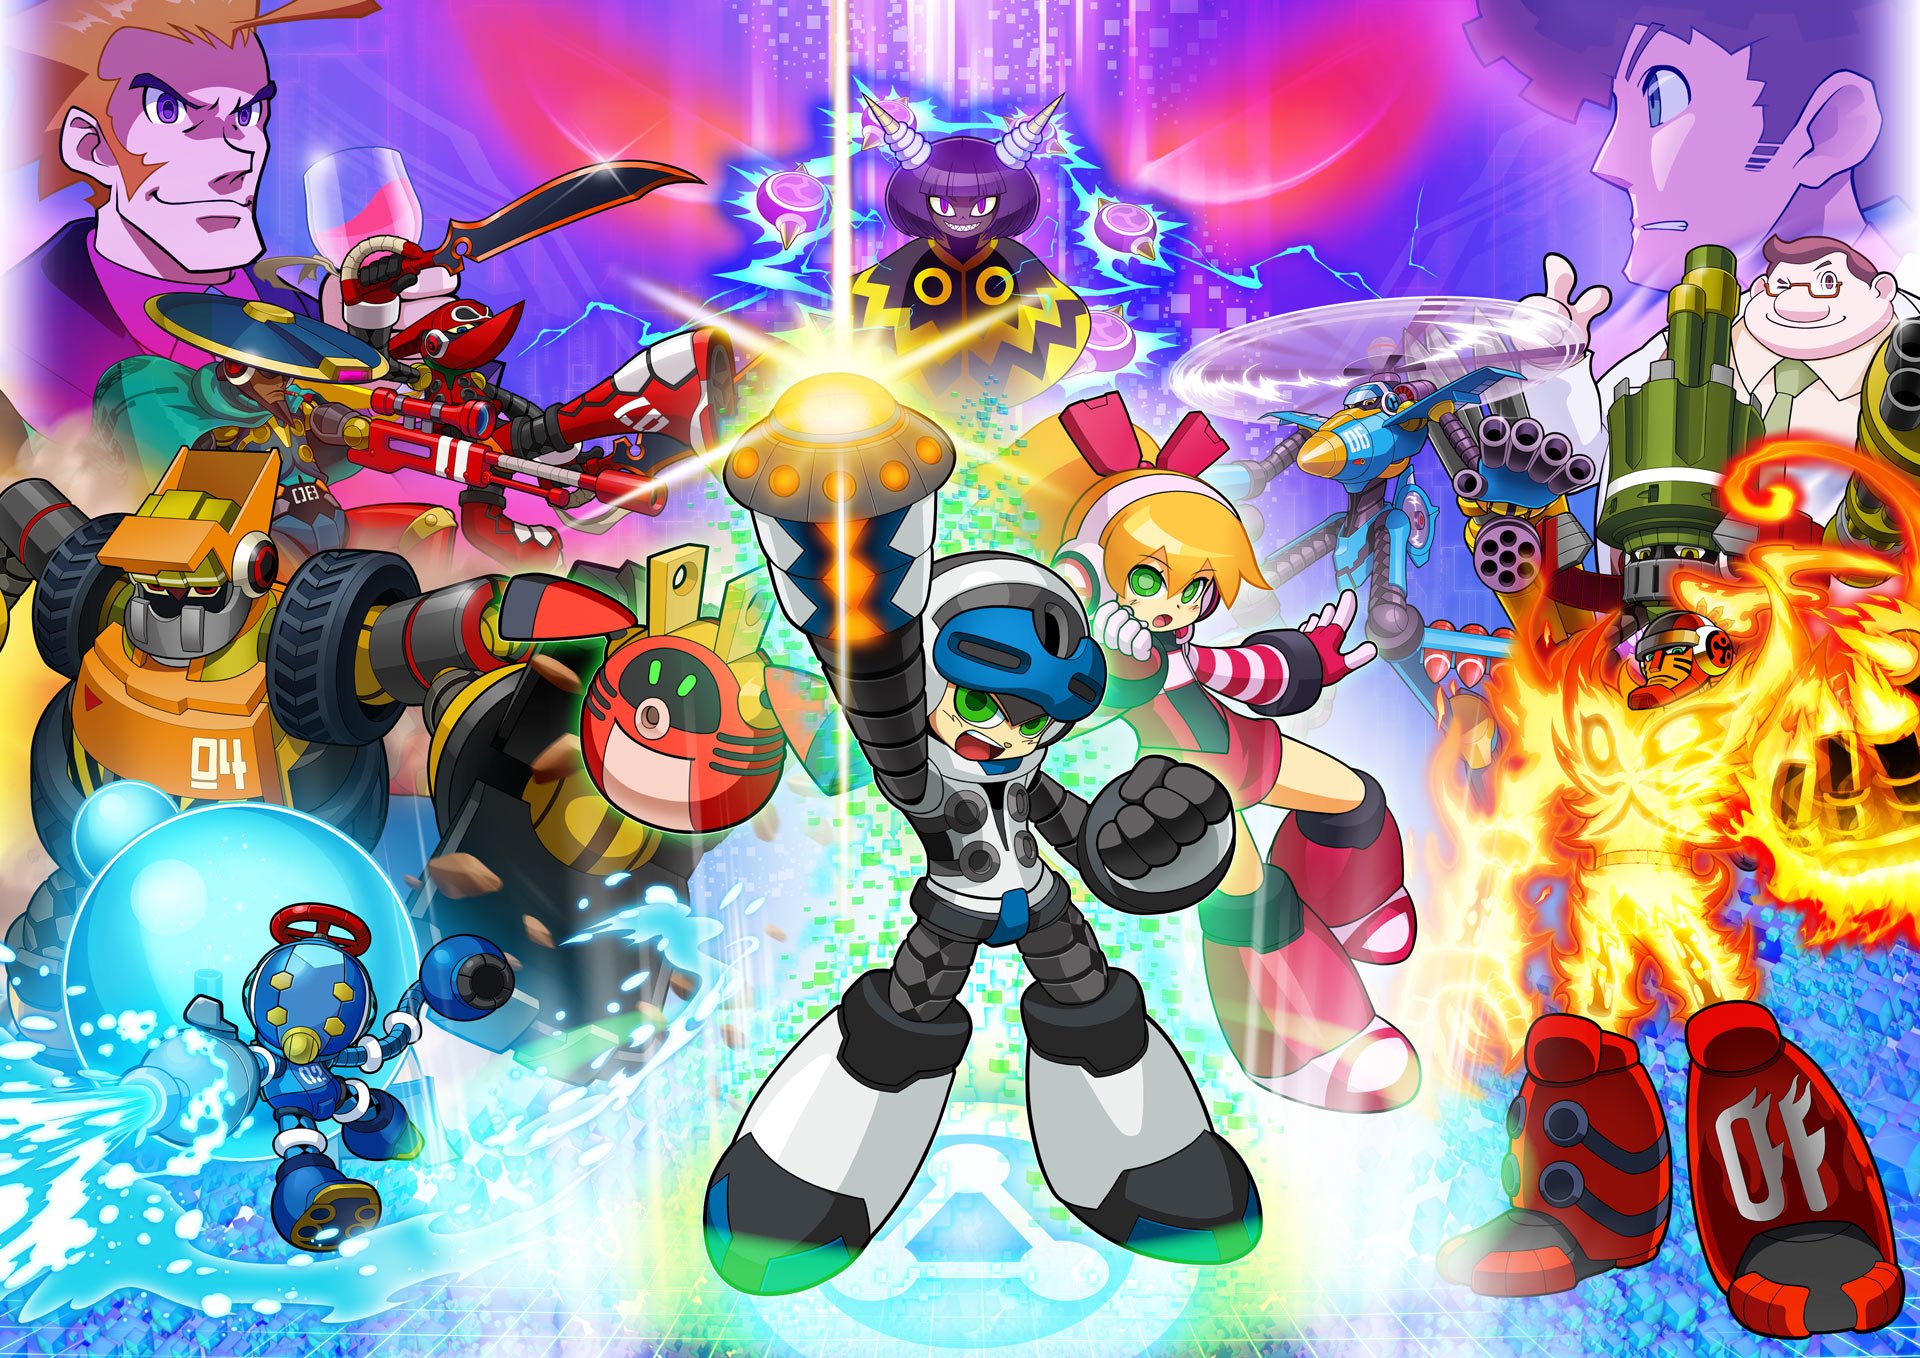 Mighty-No-9-Review.jpg